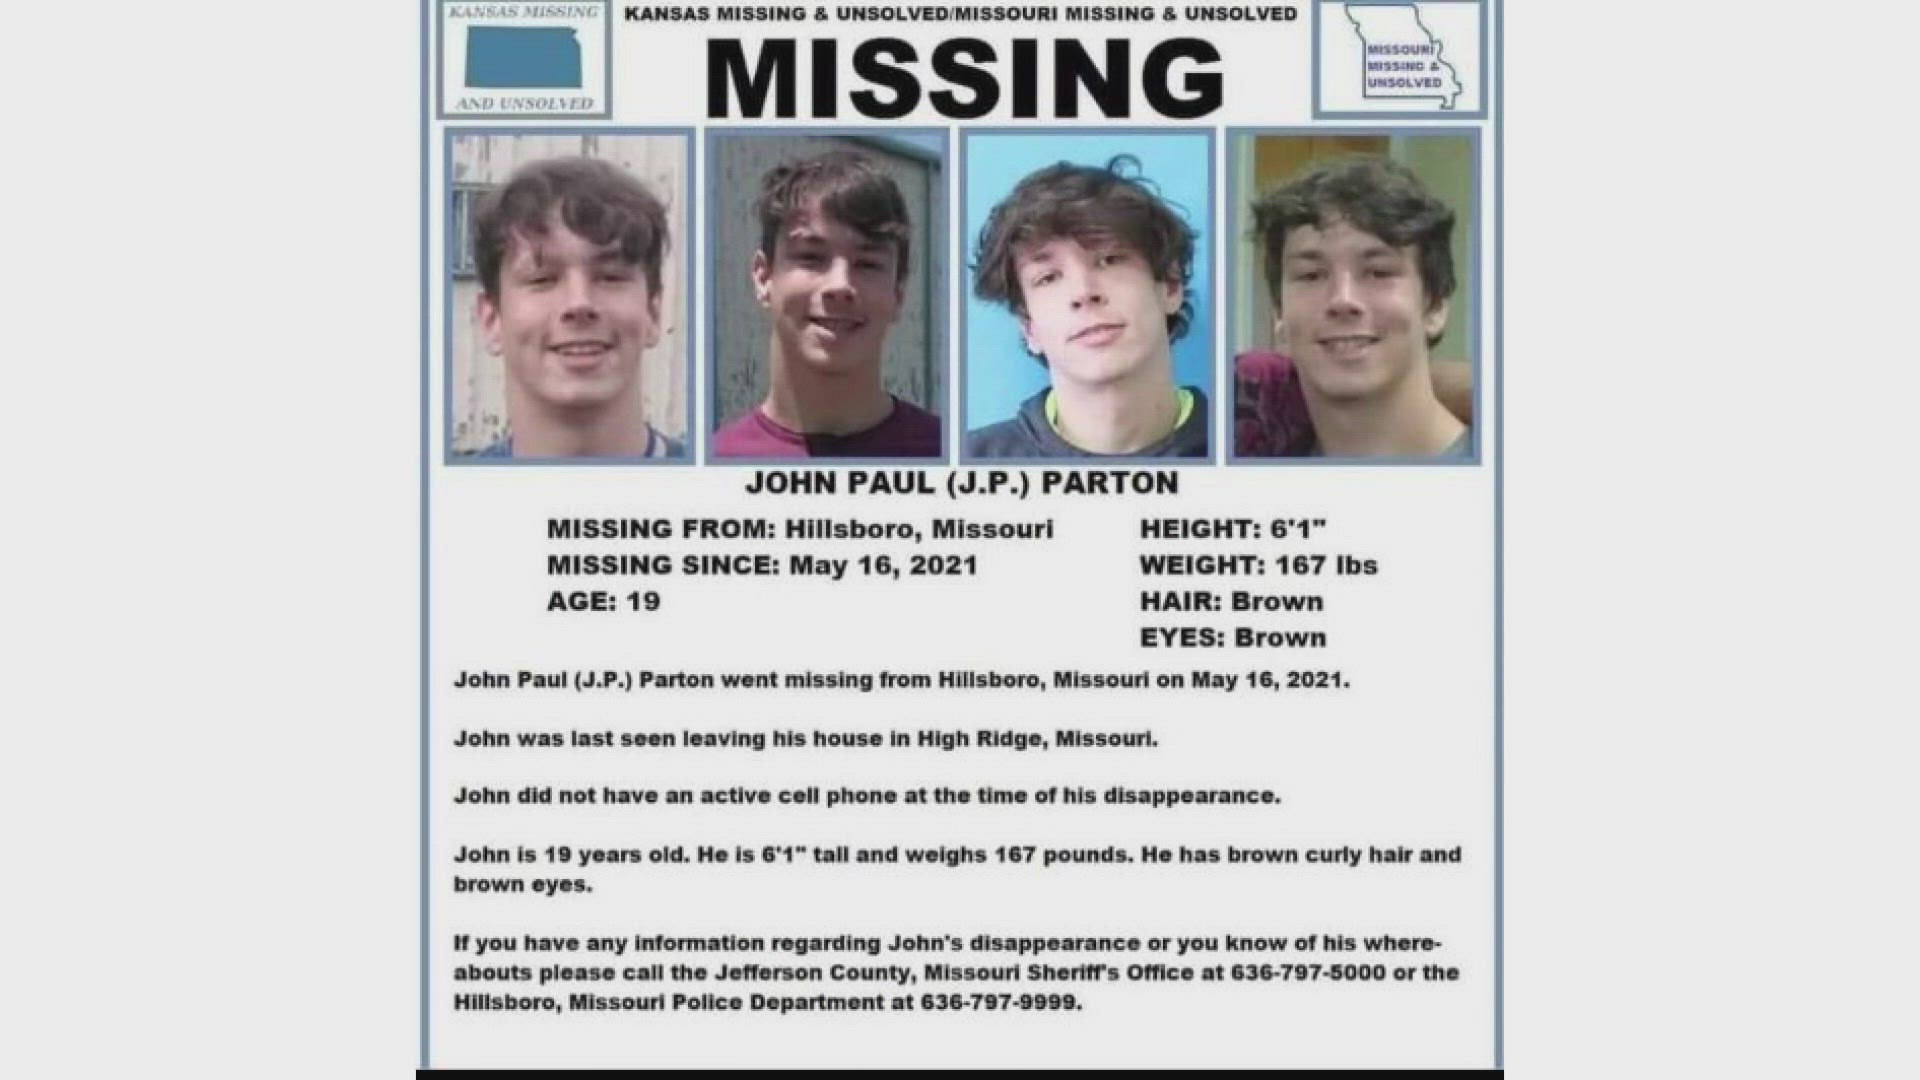 Though investigators are still looking for John Paul Parton's body, they say they now know what happened to him and who's responsible.